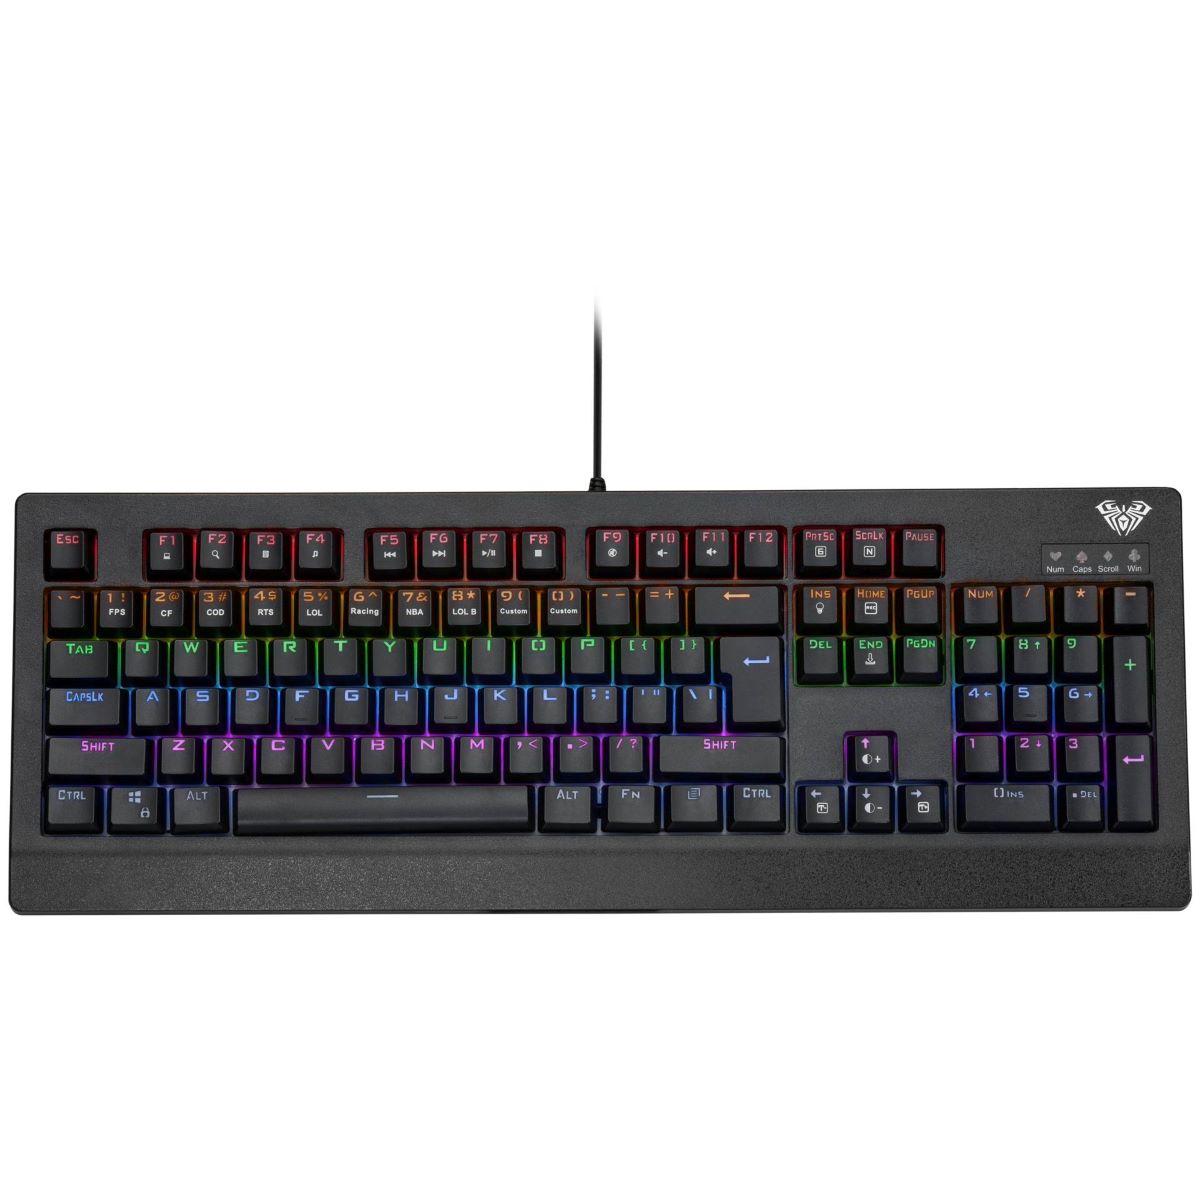 11 Amazing Aula Demon King Mechanical Gaming Keyboard Professional Usb Wired (Black) for 2023